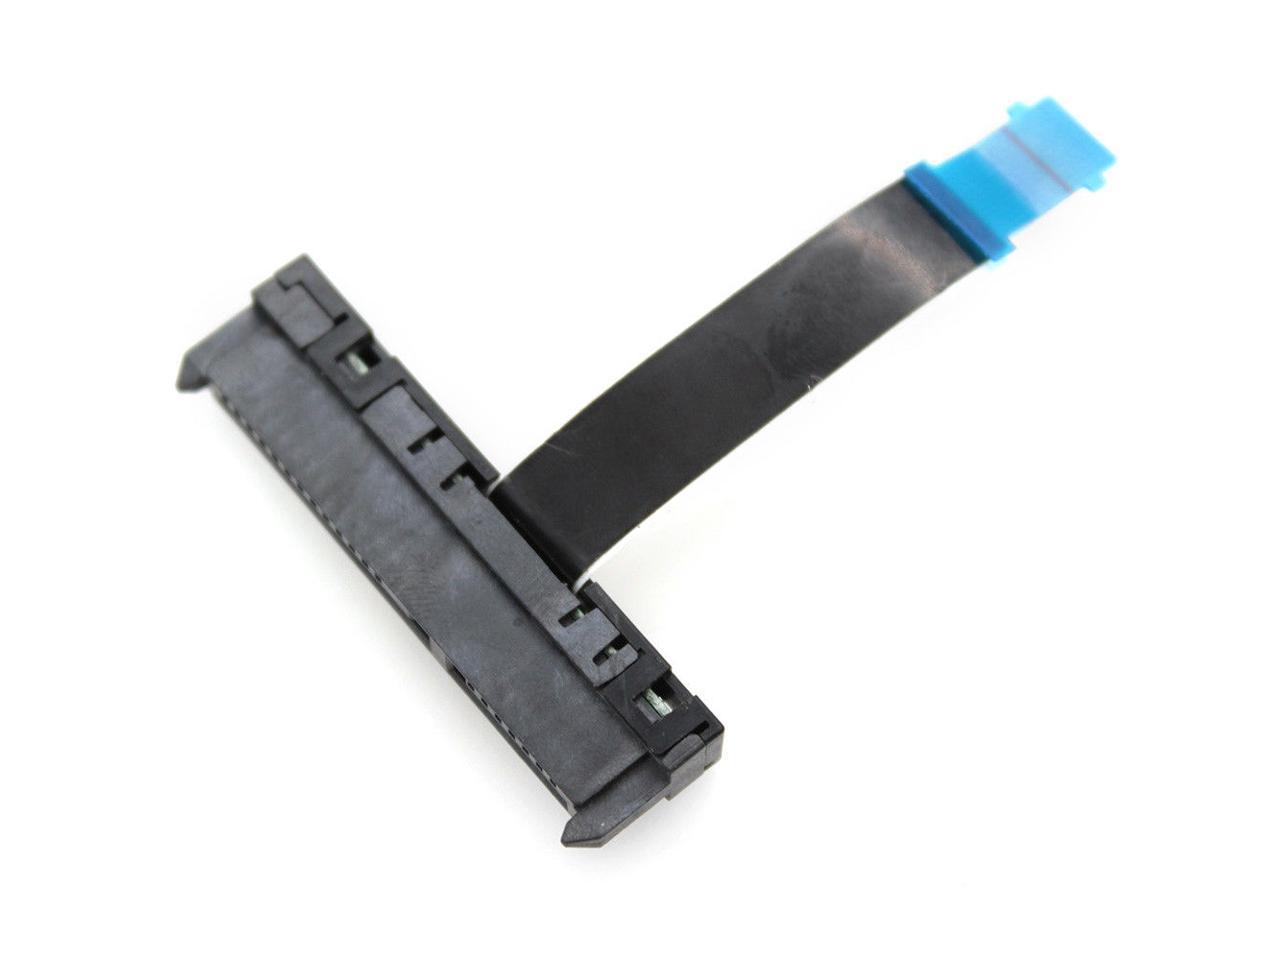 Hdd Sata Hard Drive Connector Adapter With Cable Compatible Dell Inspiron 14 3451 3452 P N 450 02v01 1001 Newegg Com